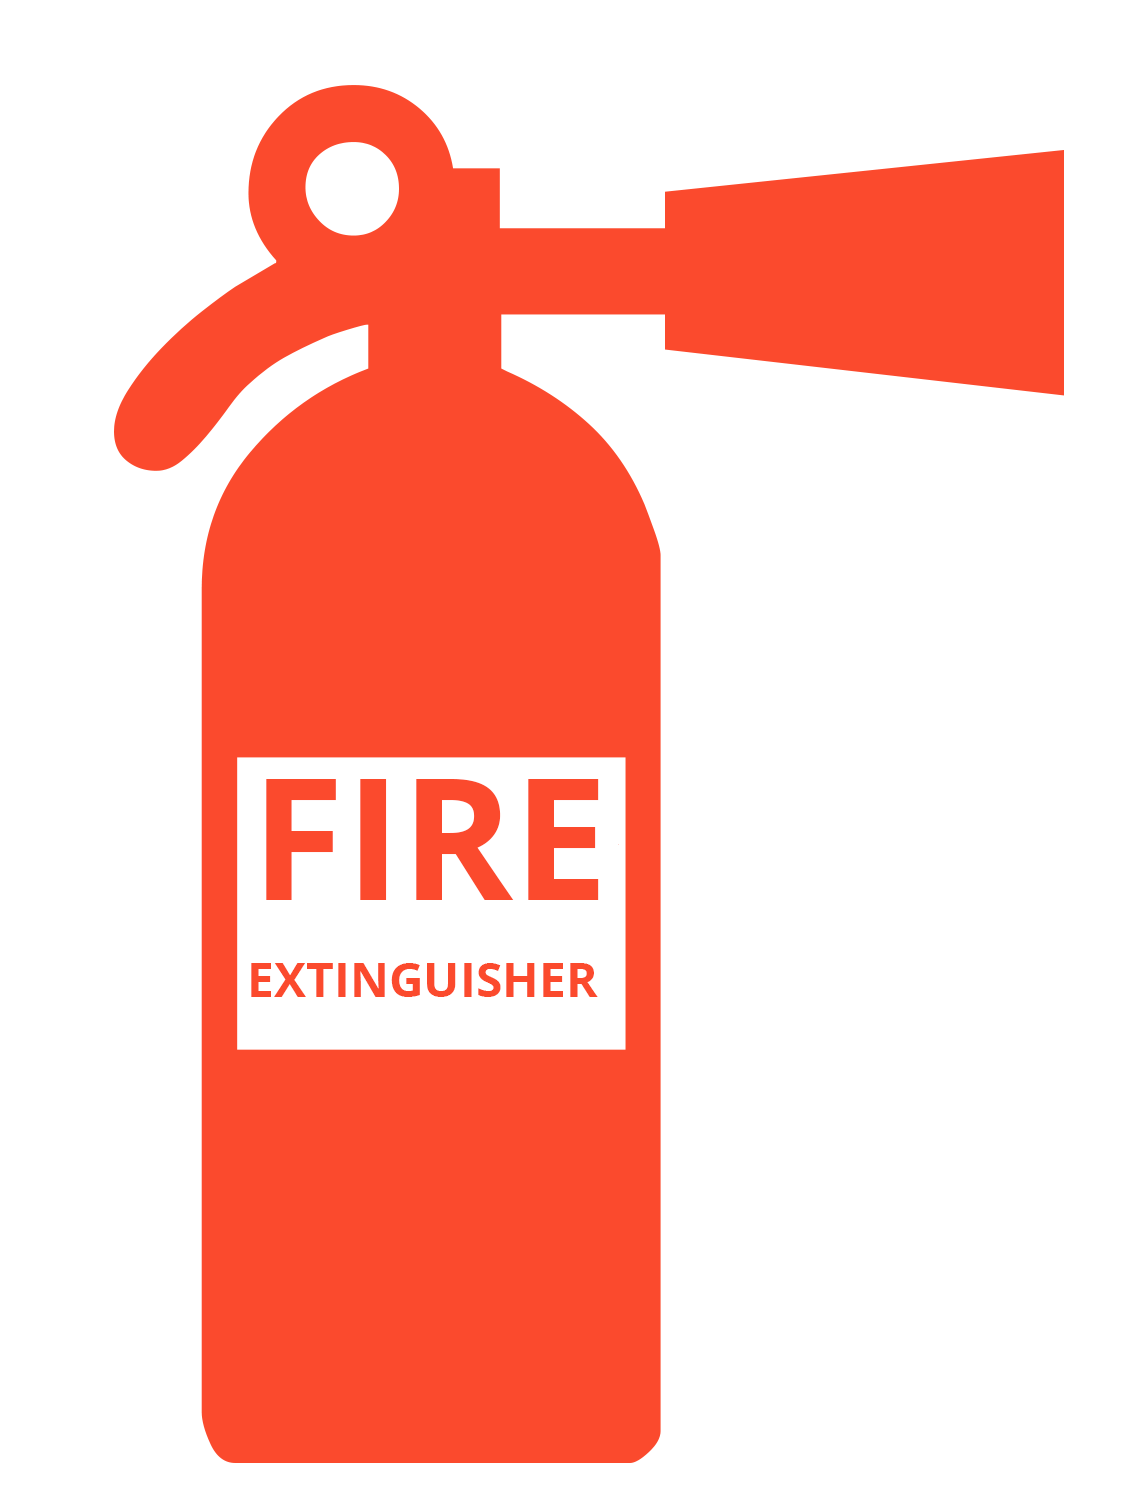 Illustration of a fire extinguisher